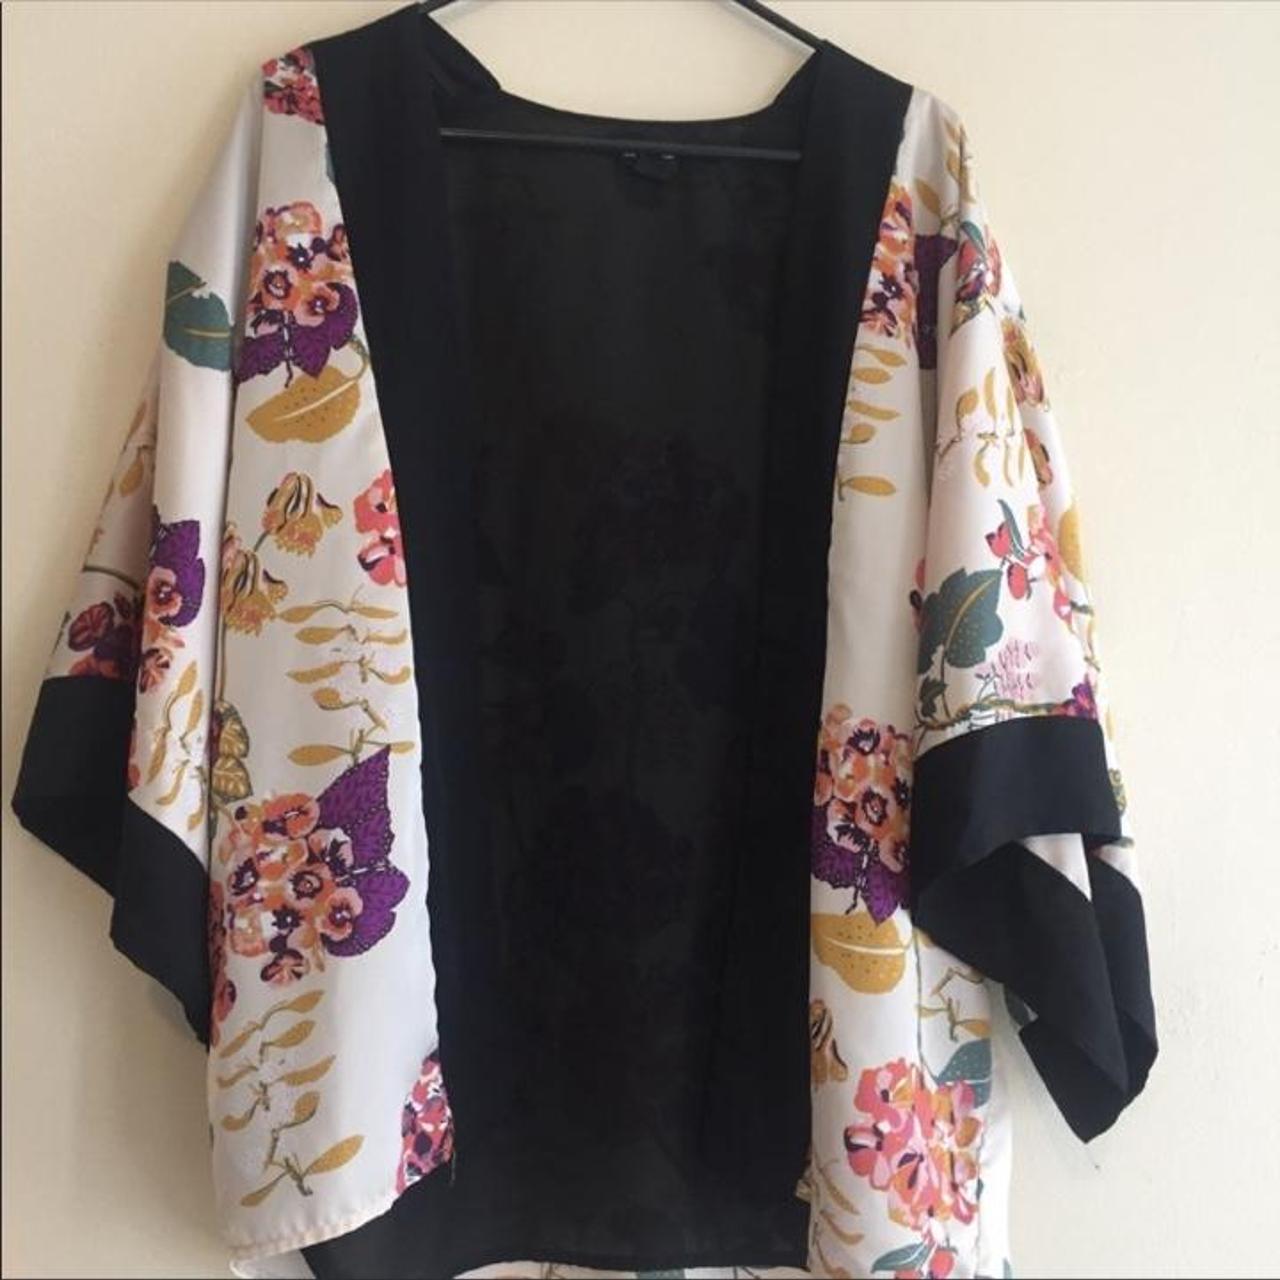 H&M floral kimono jacket, 7 for all mankind leather legging jeans